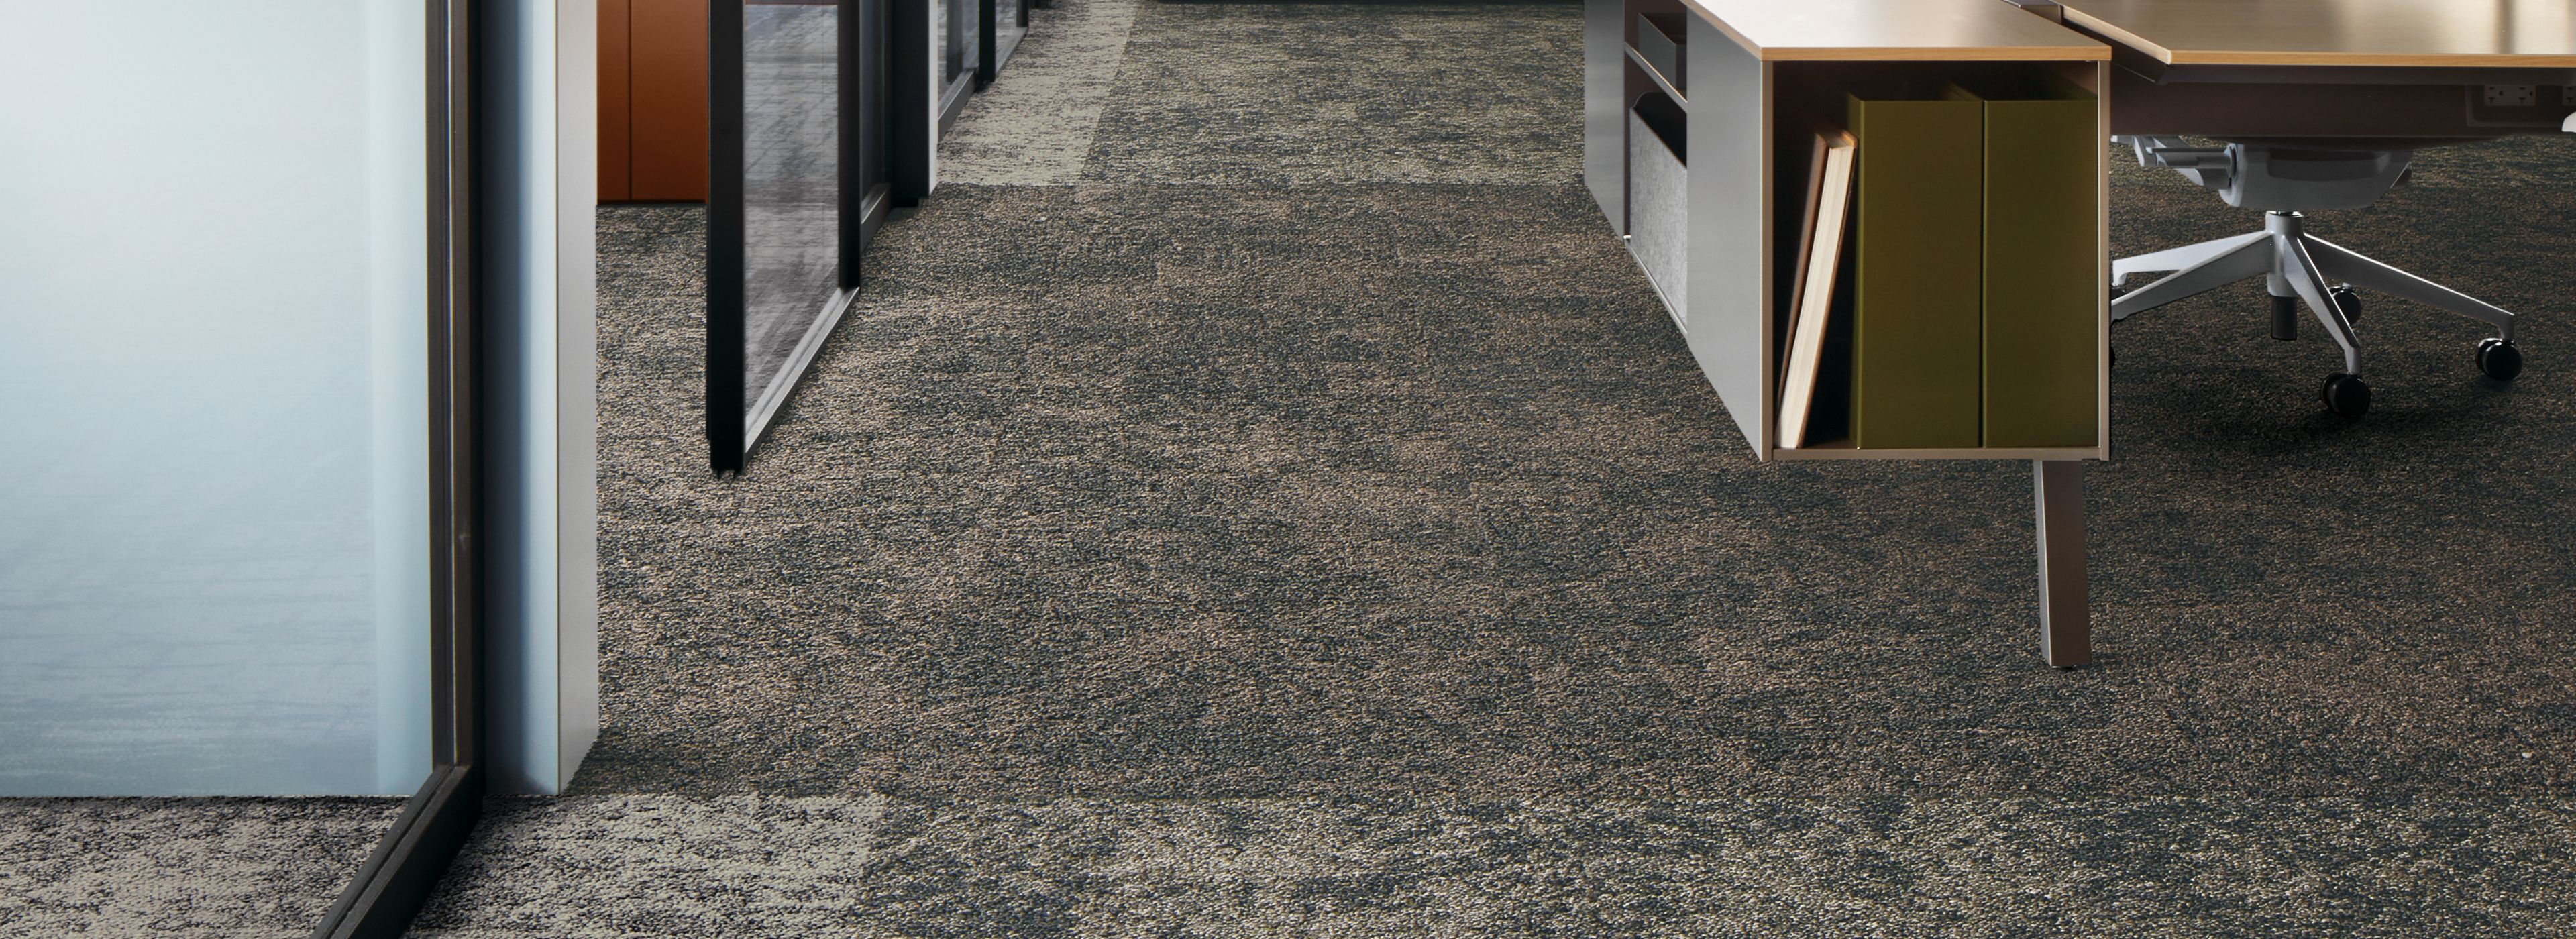 Interface Two To Tango carpet tile in open office space imagen número 1